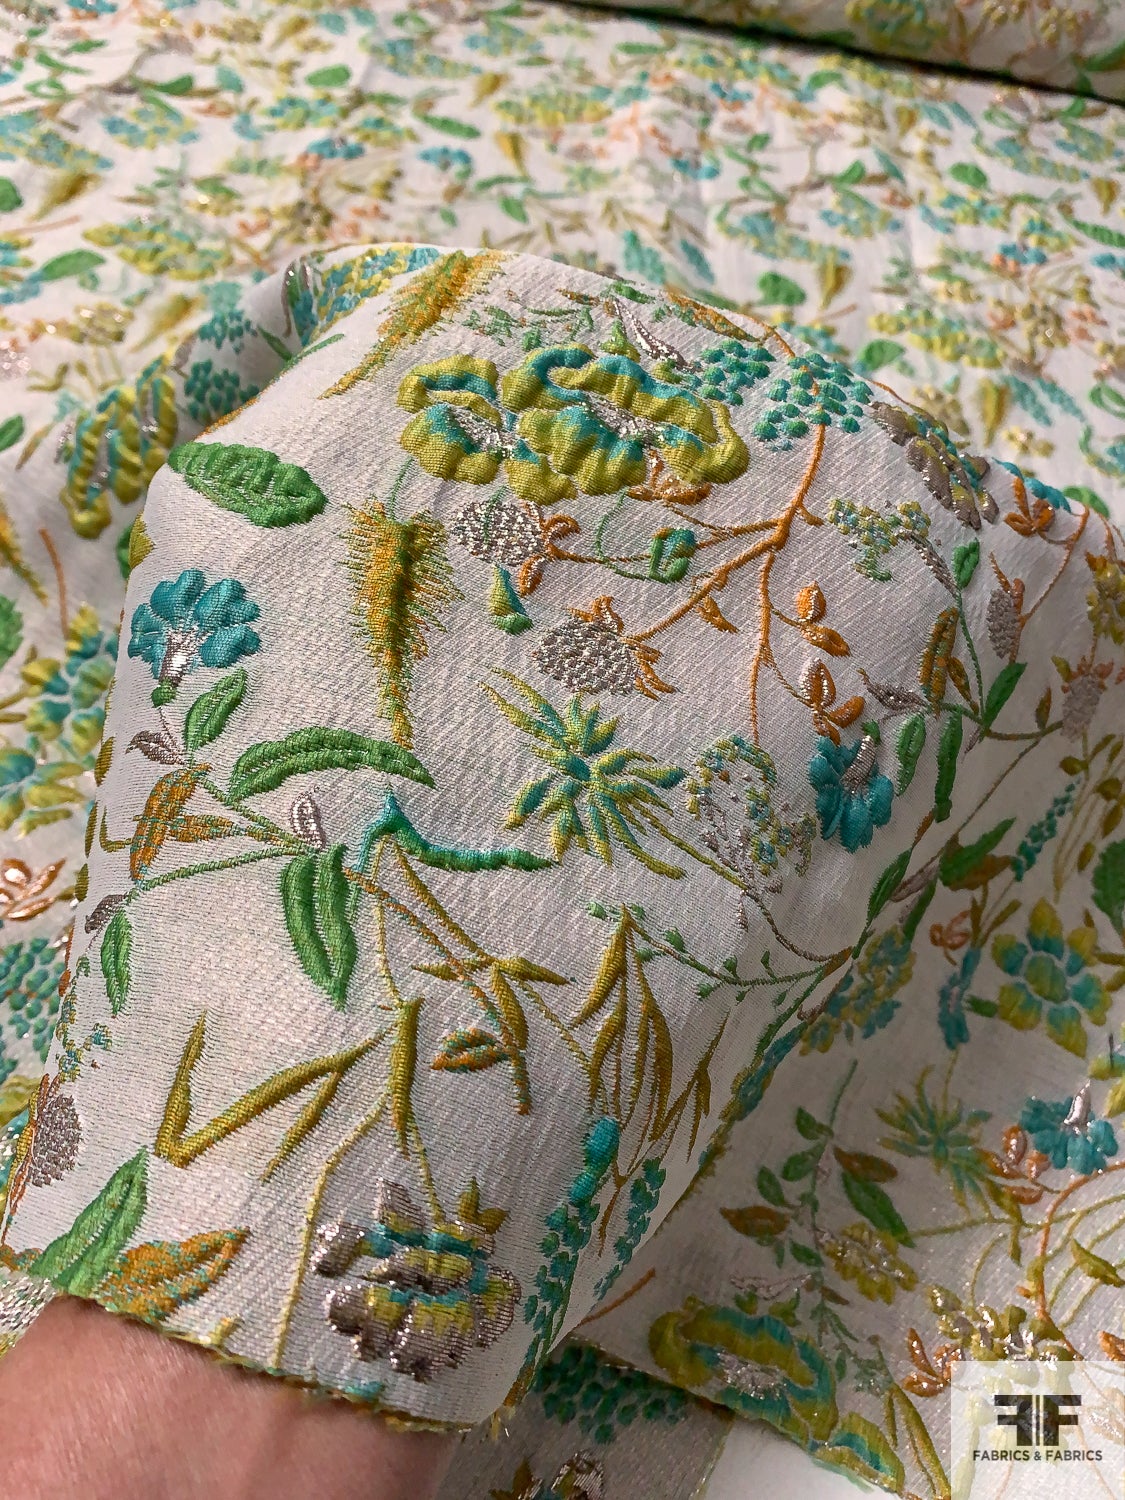 Exquisite Floral Textured Brocade with Metallic Accents - Shades of Greens / Turmeric / Grey